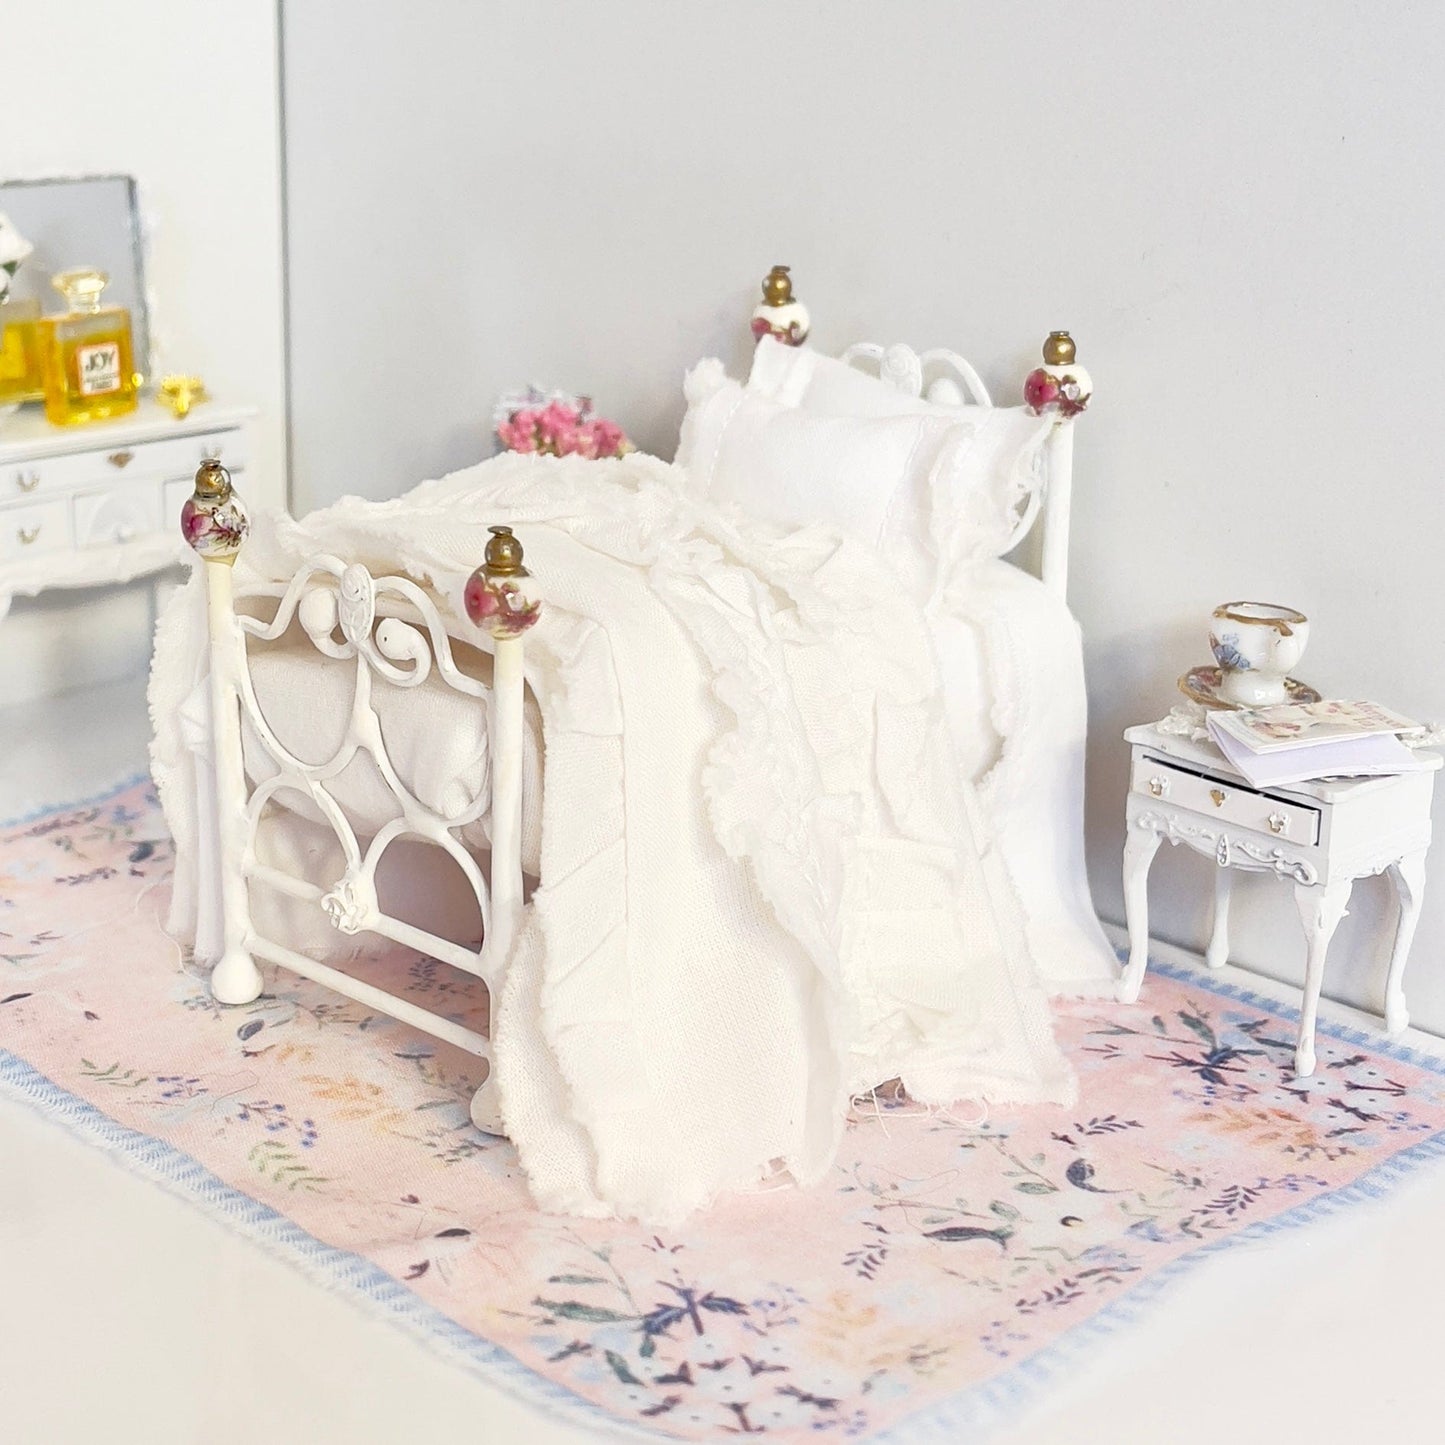 CHANTALLENA Dollhouse Accessories 1:24 Scale |  Five Piece Distressed White Cotton with Ruffled Pillows Dollhouse Bedding Set | Petite Trina